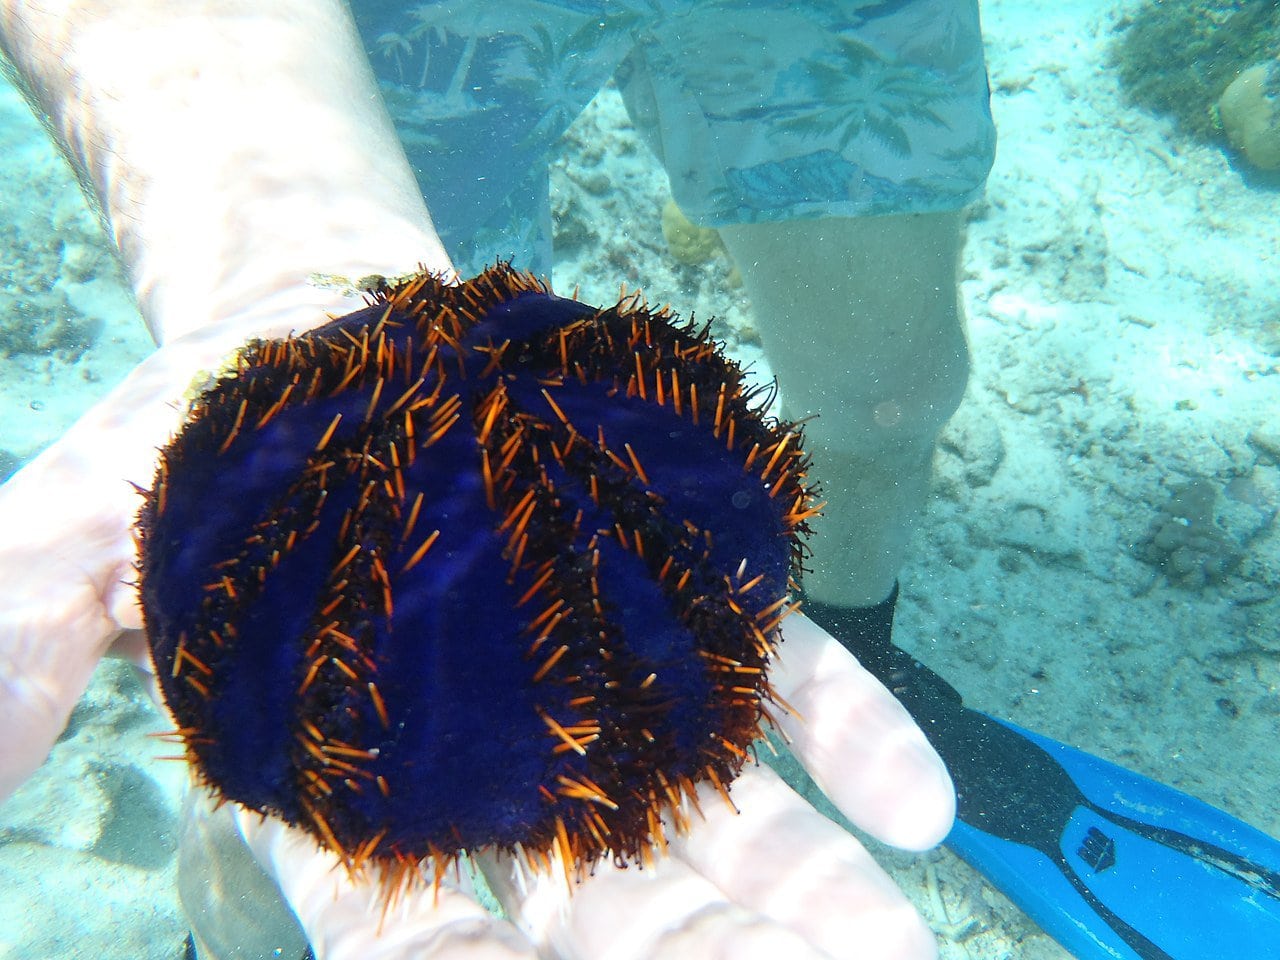 collector urchin. Photo by Lisa Bennett Wikimedia Commons